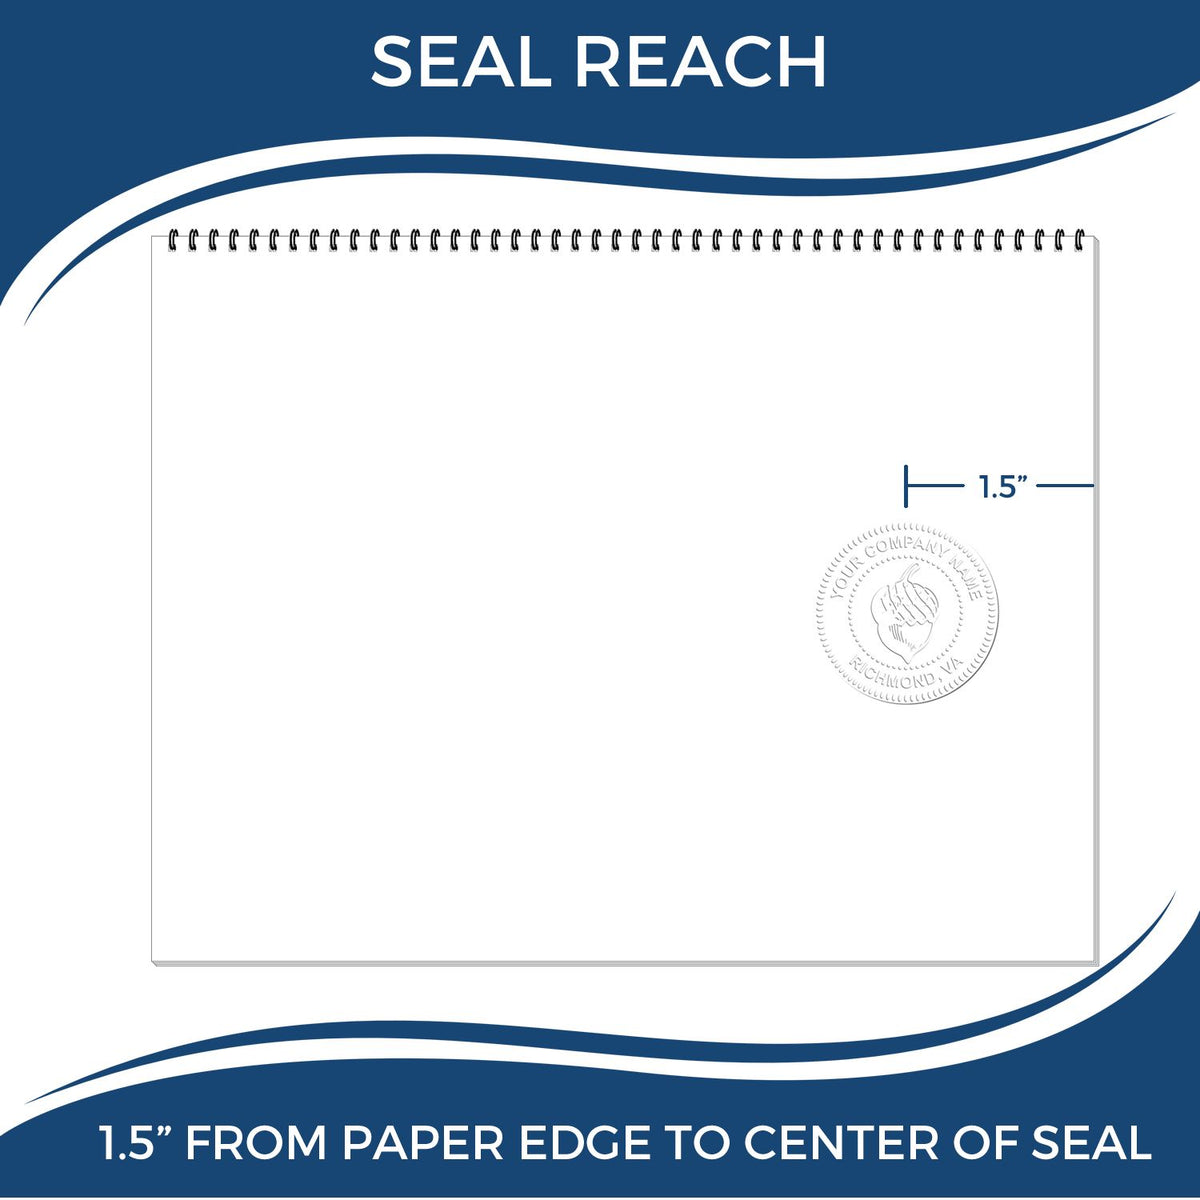 An infographic showing the seal reach which is represented by a ruler and a miniature seal image of the State of Nebraska Soft Land Surveyor Embossing Seal